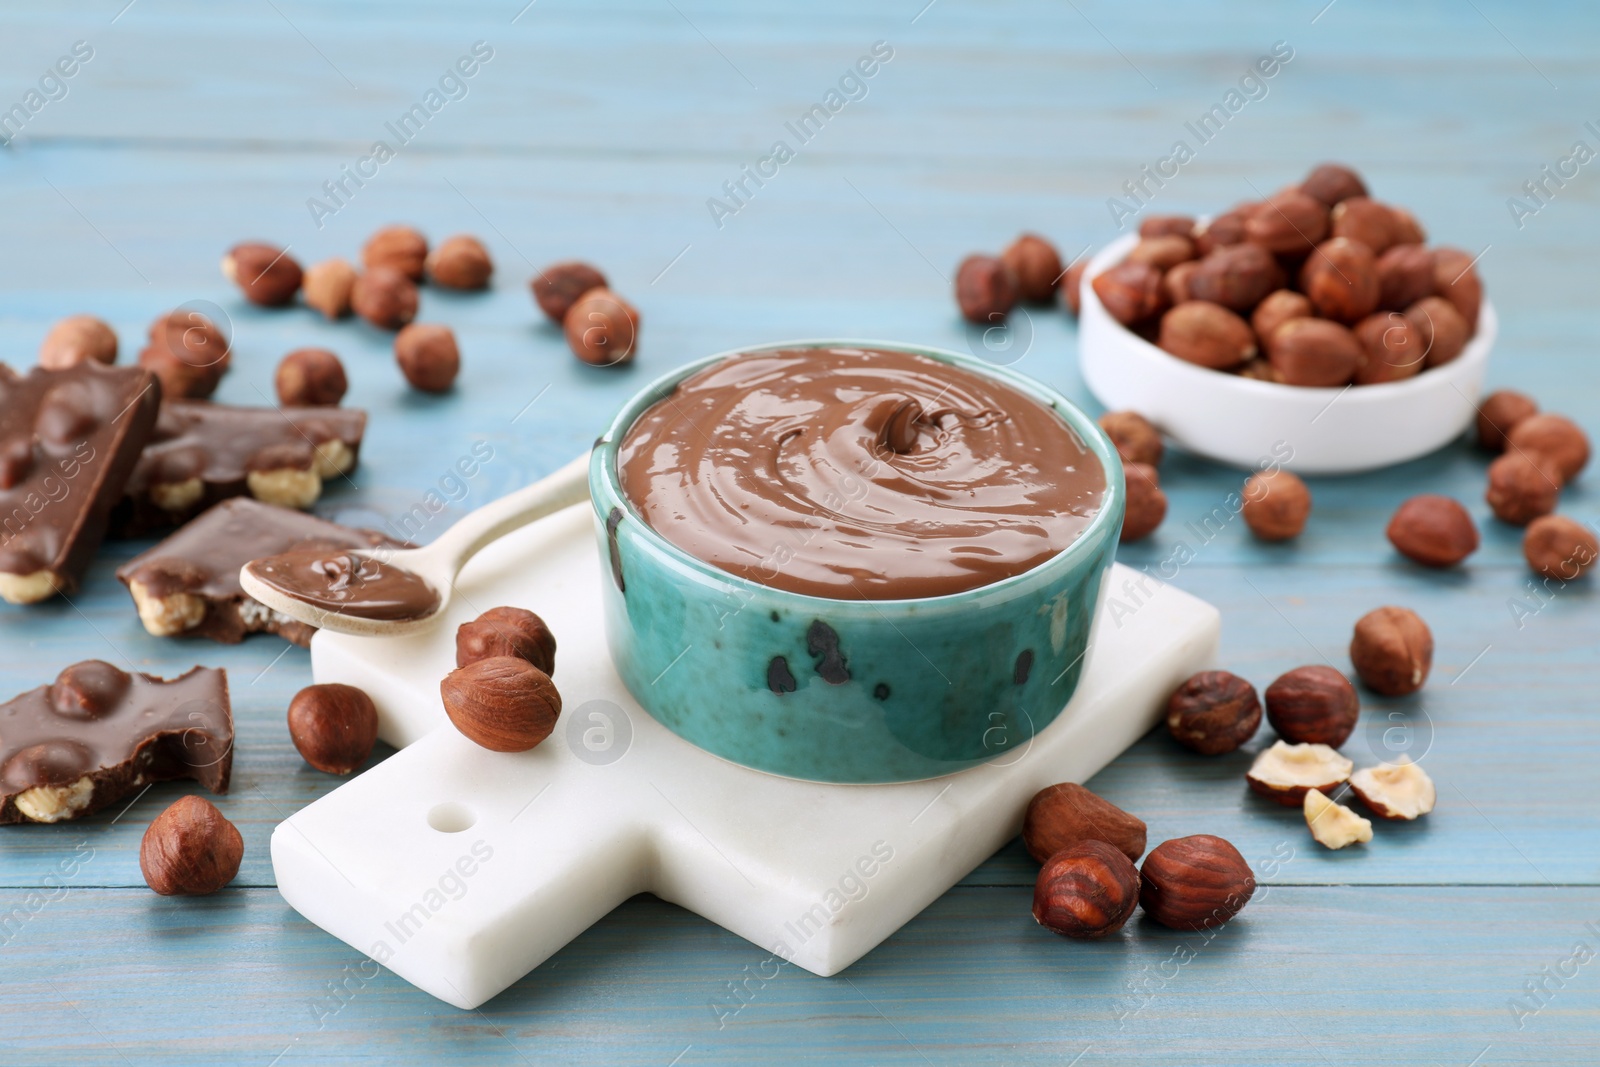 Photo of Bowl with tasty paste, chocolate pieces and nuts on light blue wooden table